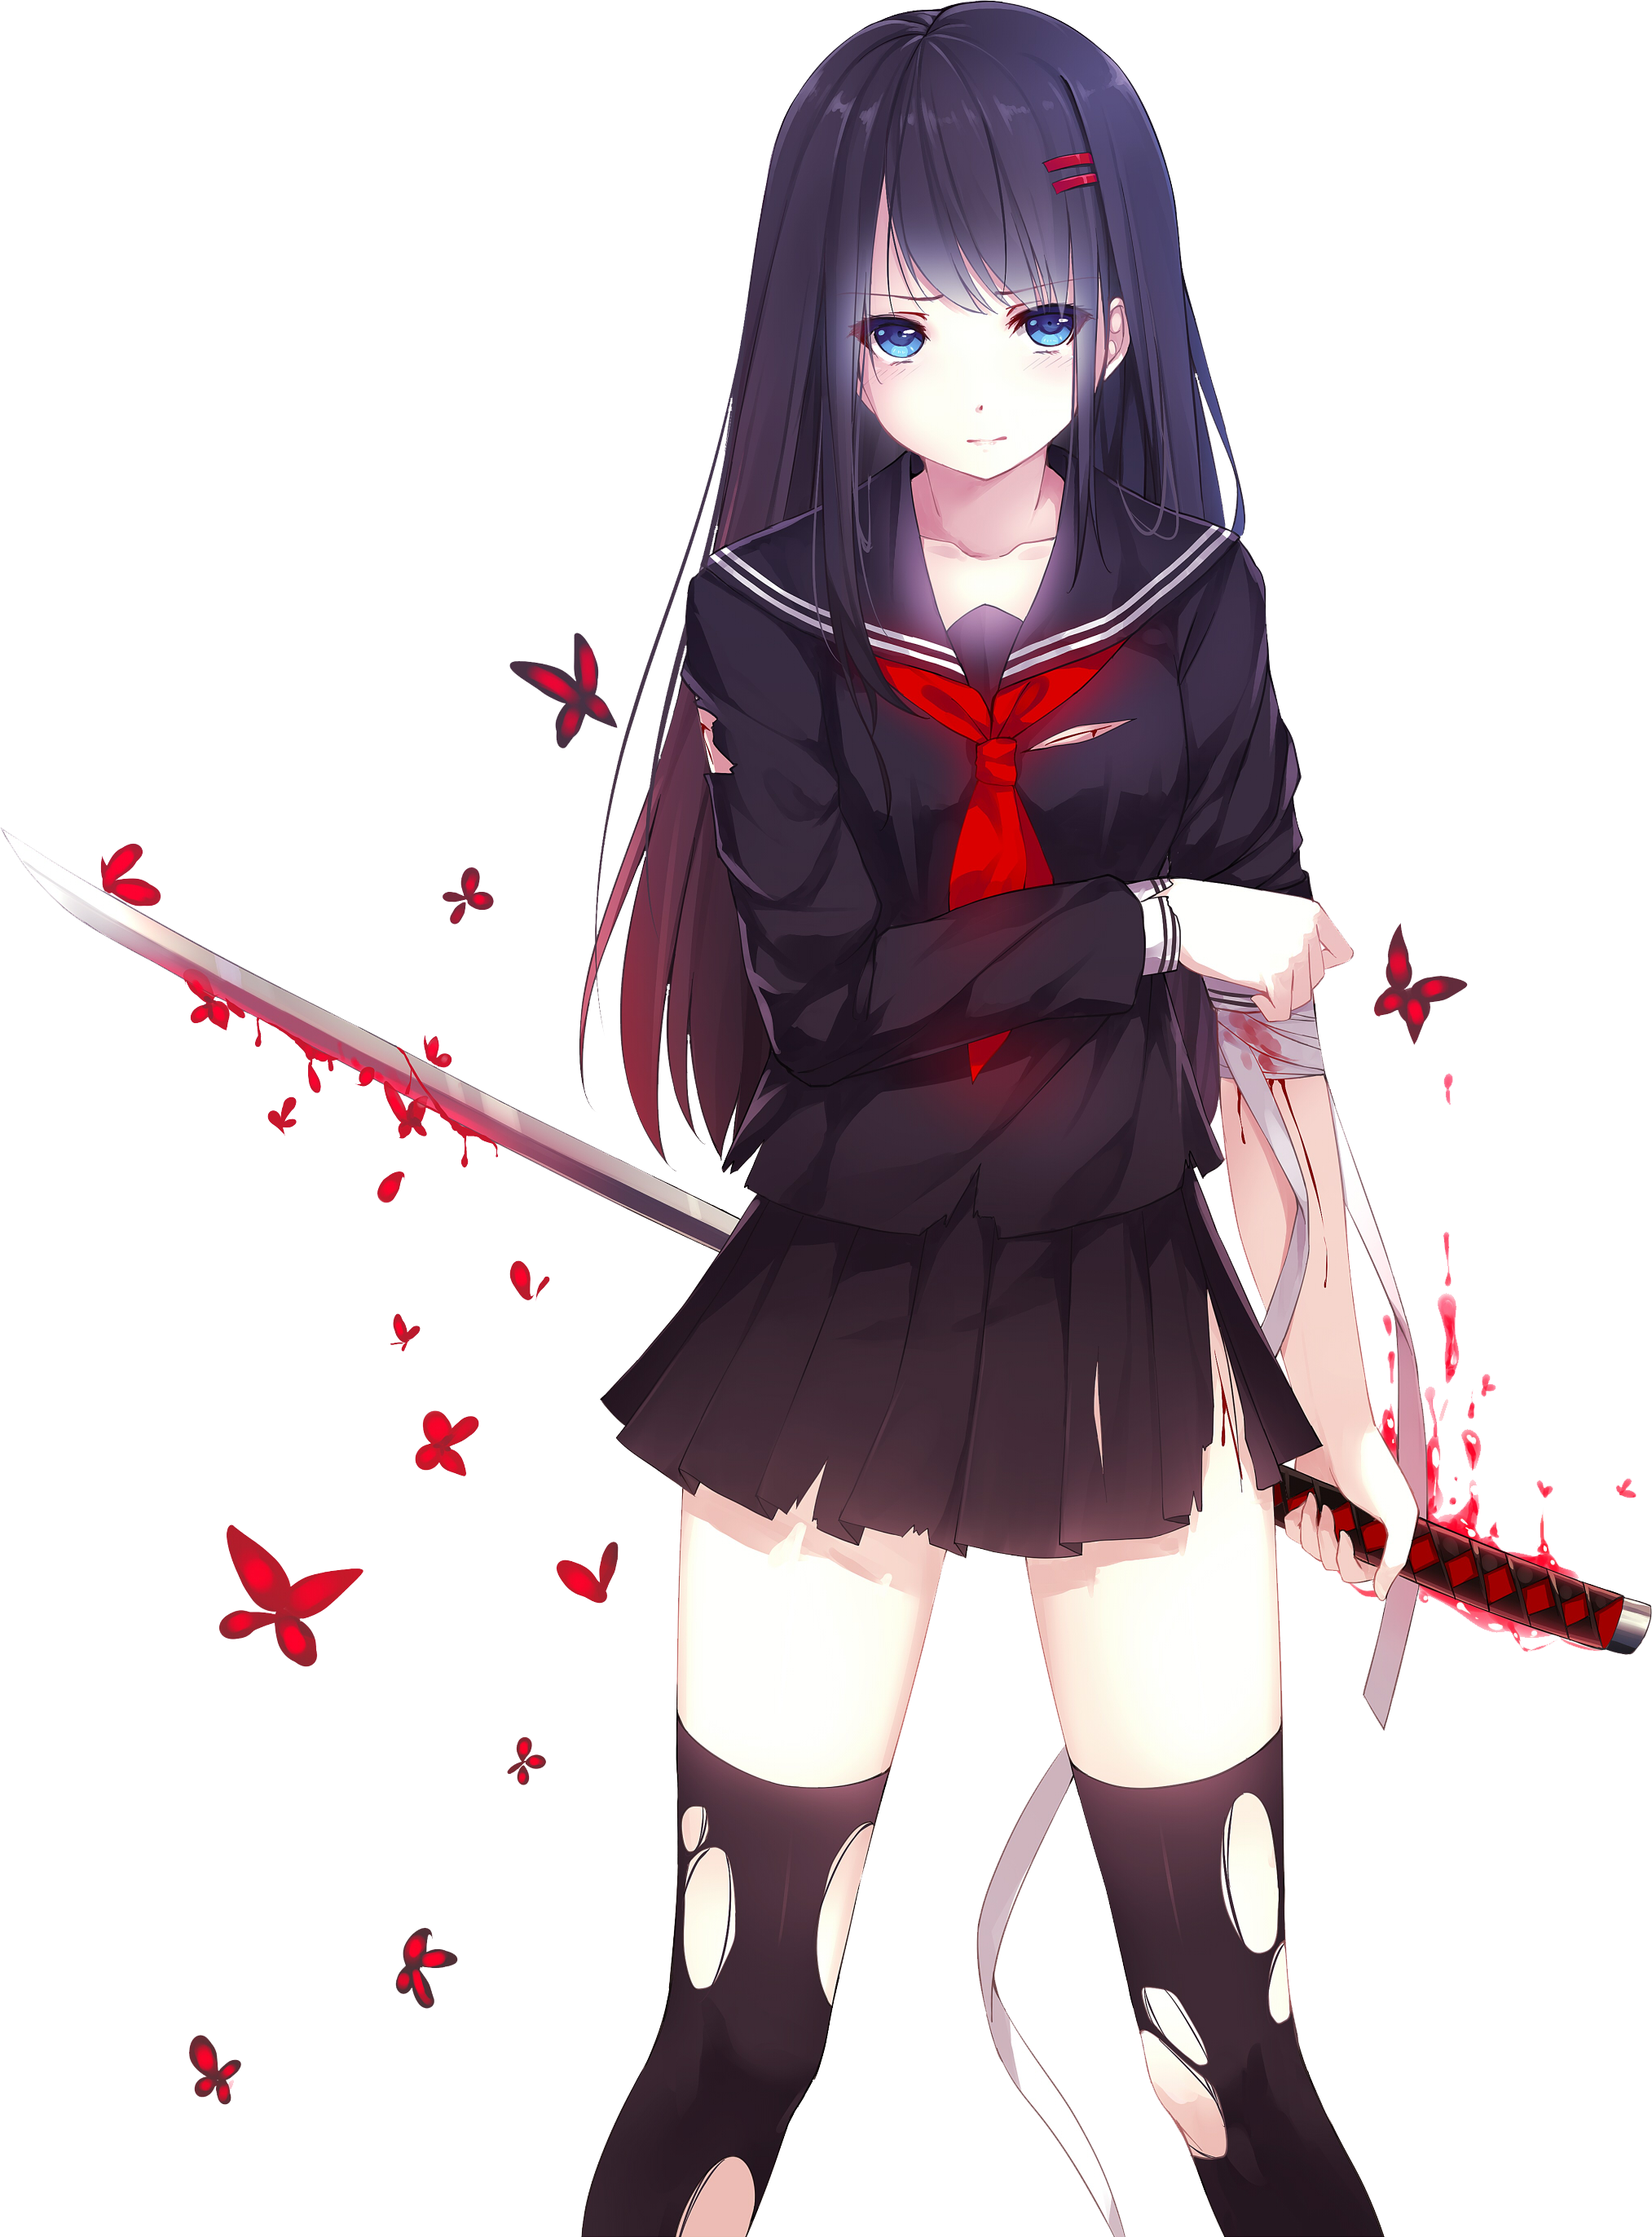 Anime Girl With Black Hair PNG Images Transparent Background | PNG Play